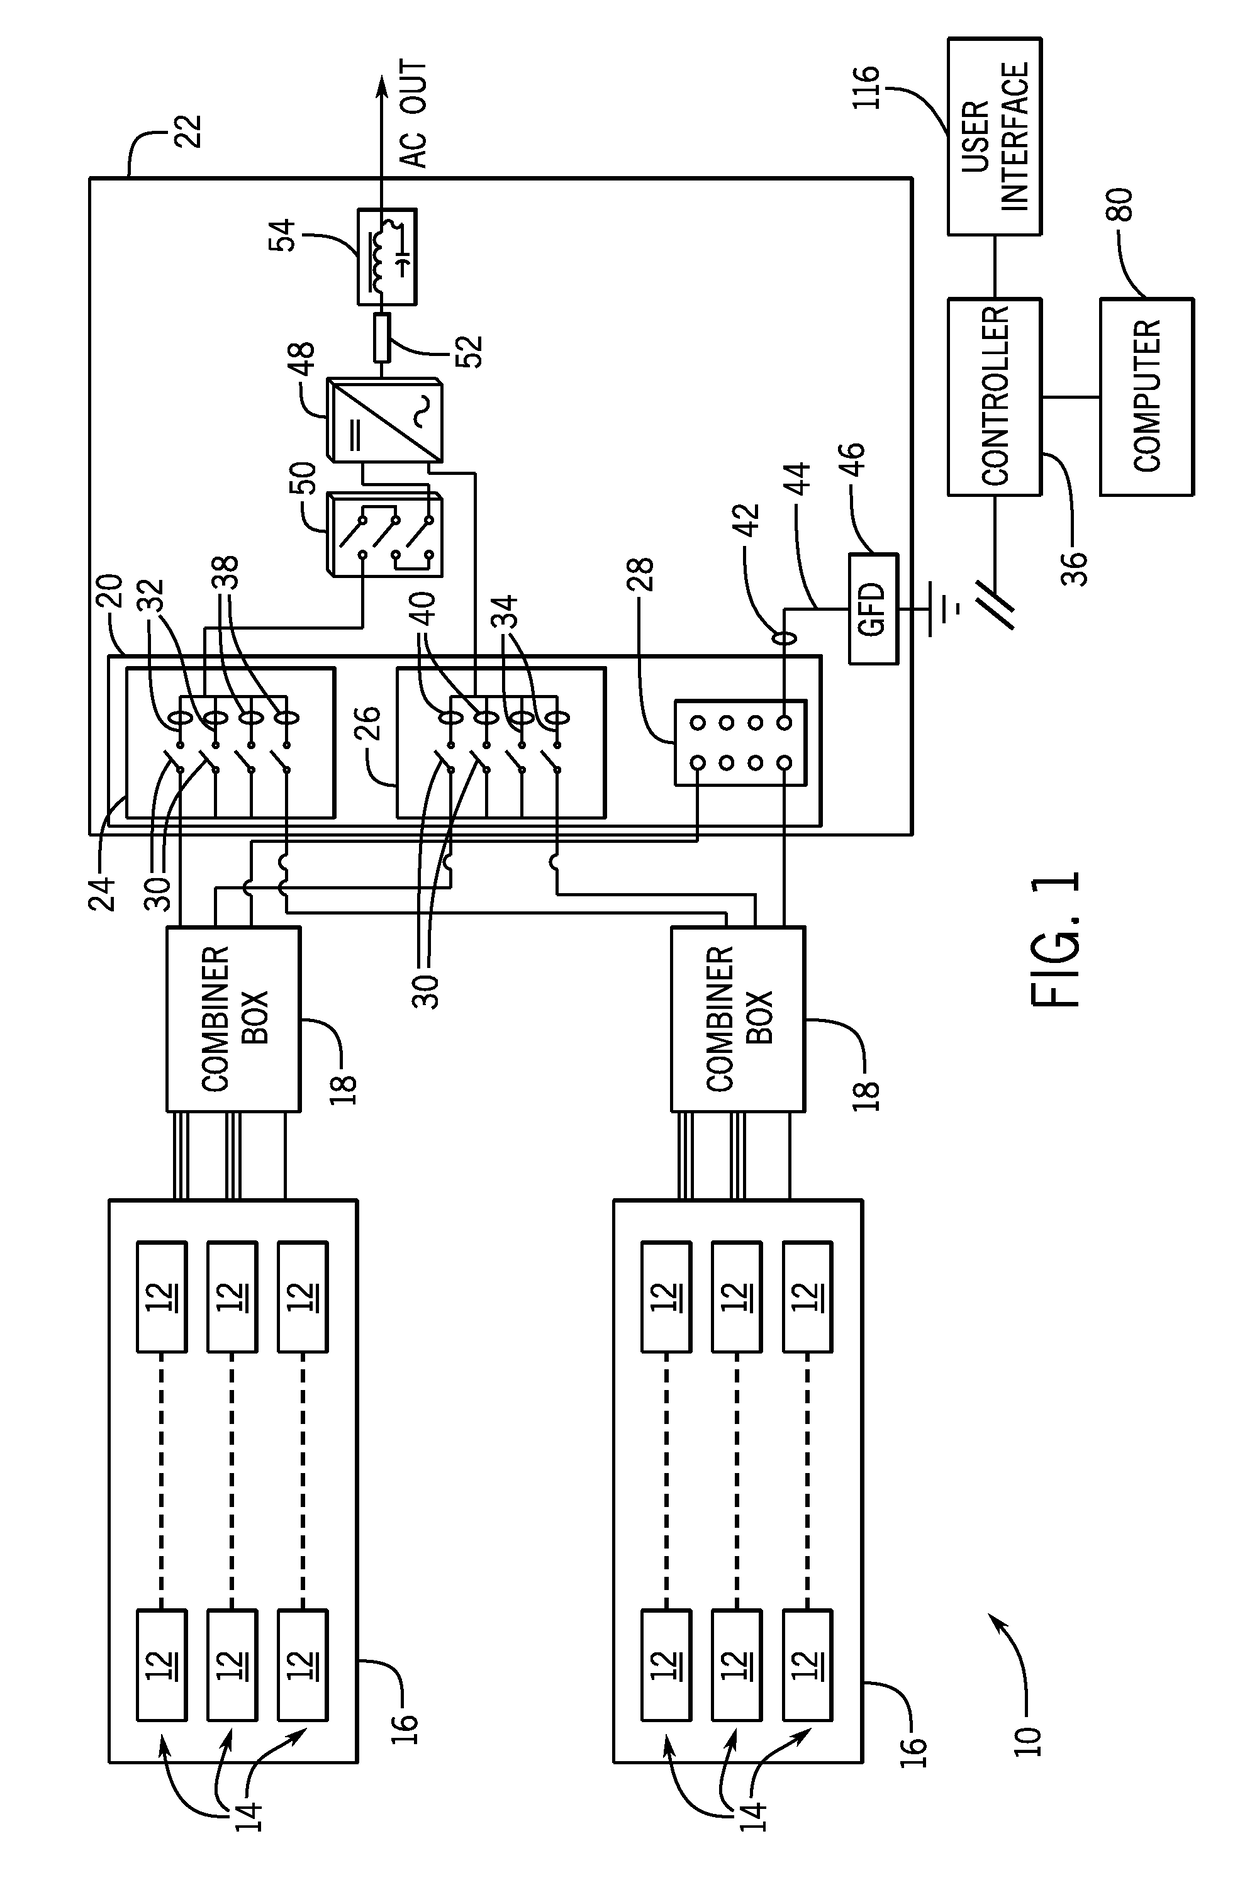 System and method of sensing and isolating a ground fault in a dc-to-ac power conversion system